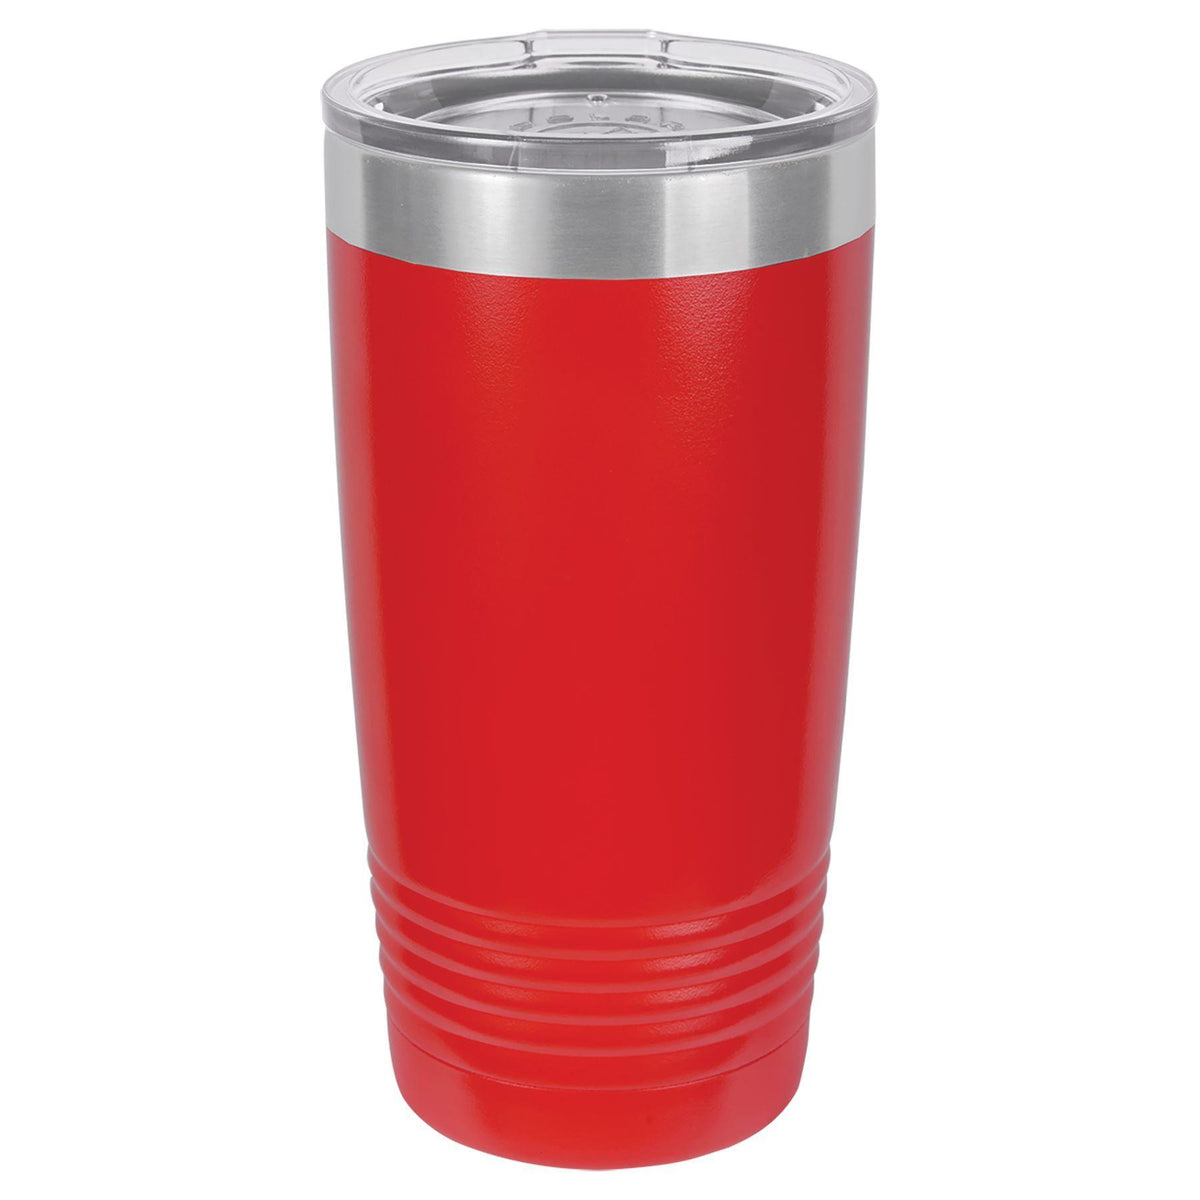 https://cdn.shopify.com/s/files/1/0096/6977/1330/products/20-oz-and-30-oz-stainless-tumblers-polar-camel-tumbler-hells-canyon-designs-20oz-red-614132_1200x.jpg?v=1626107785